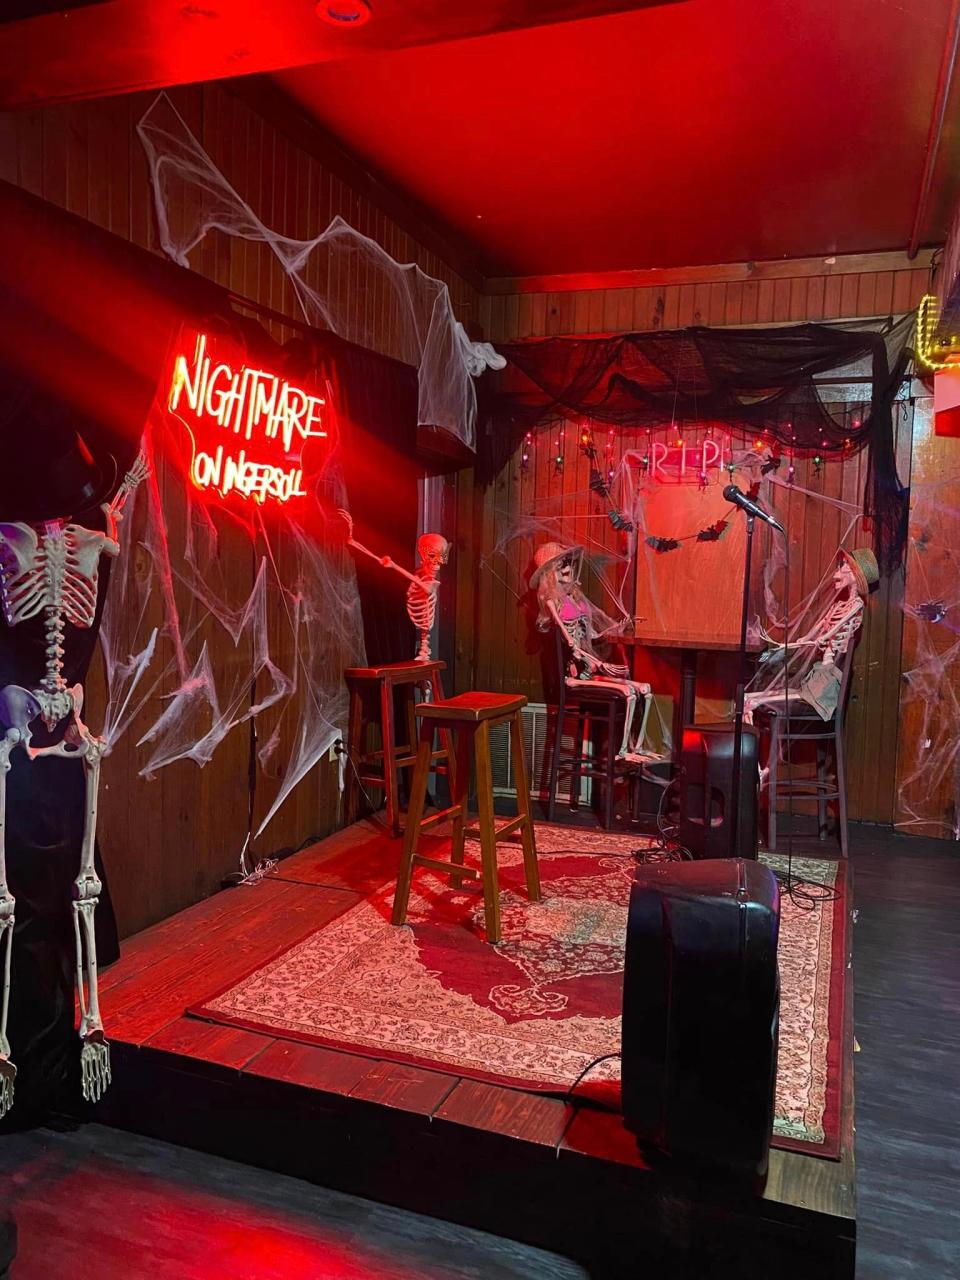 Nightmare on Ingersoll is located at 3124 Ingersoll Ave. in Des Moines and will be open daily through Nov. 4.